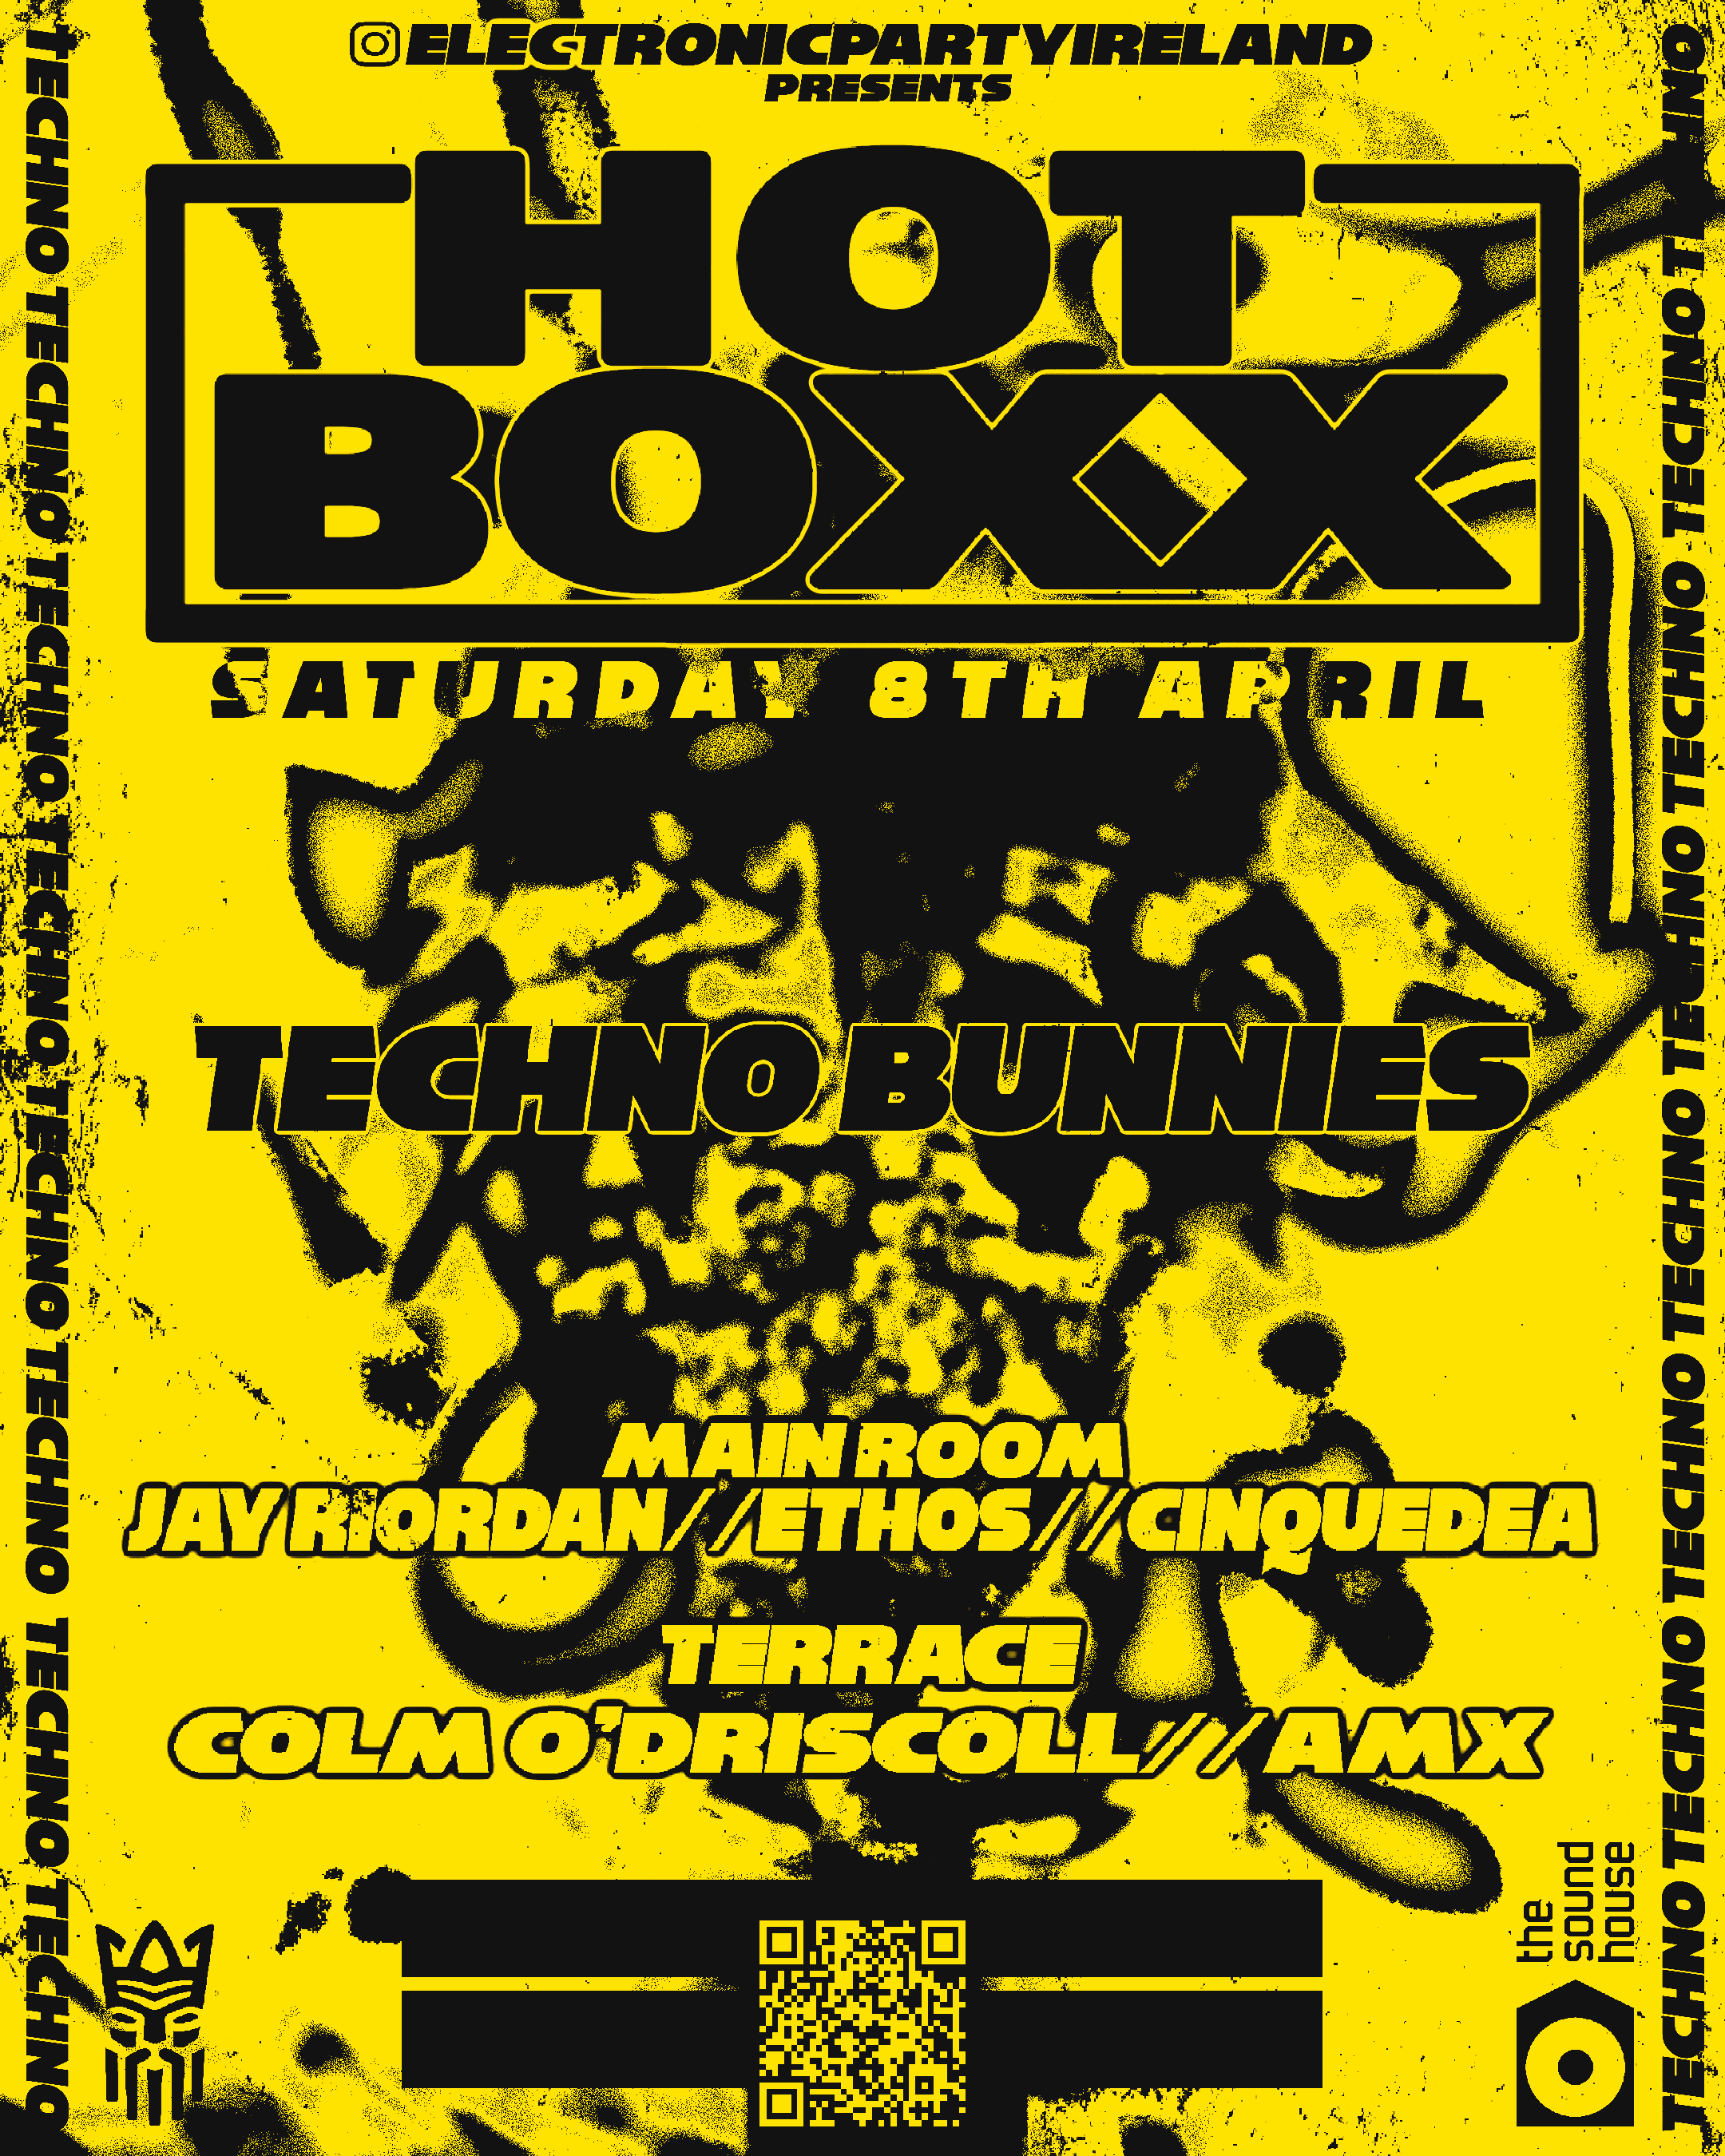 Electronic Party Ireland: HOTBOXX - Techno Bunnies - フライヤー表